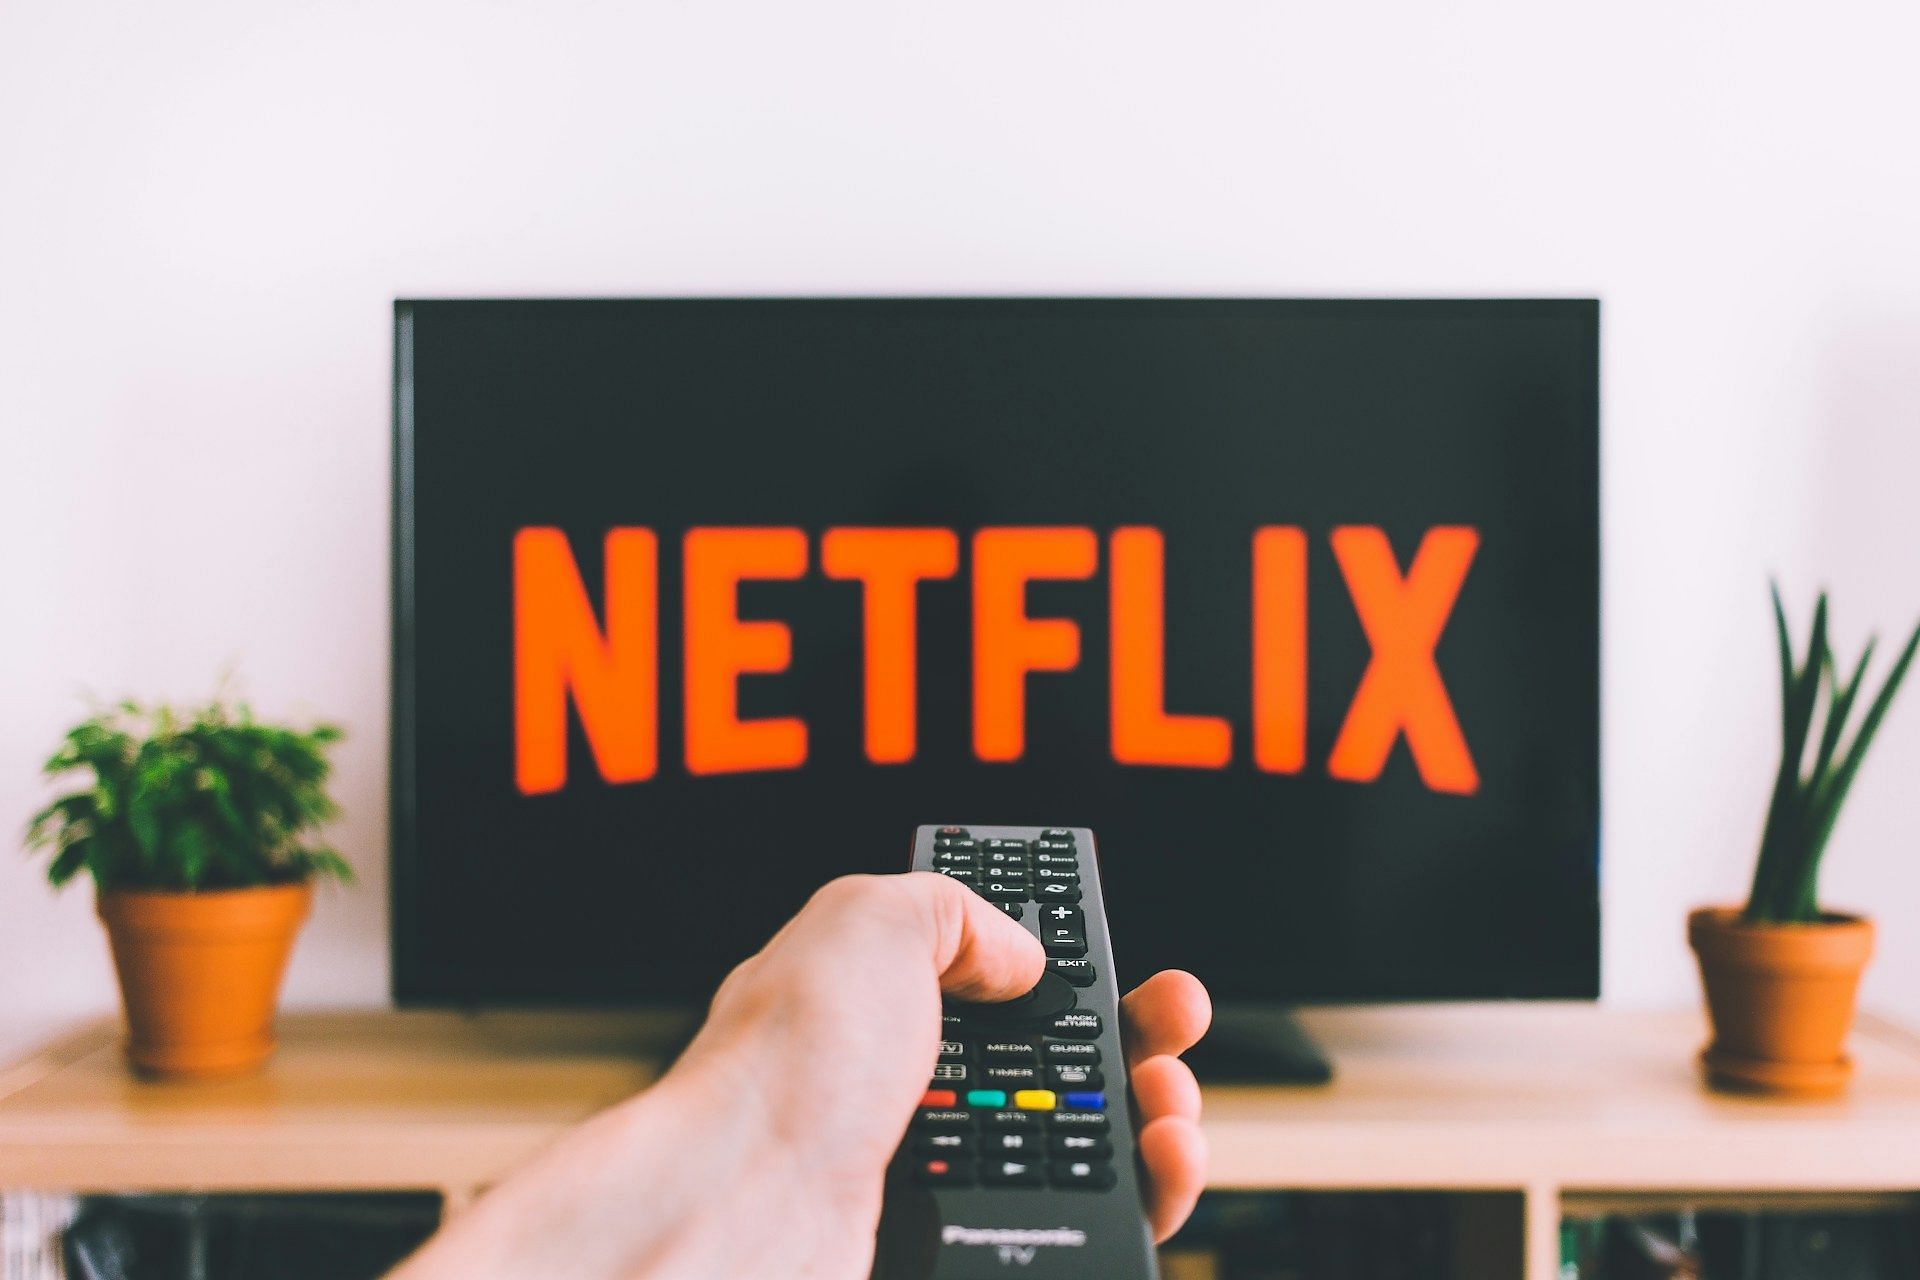 Made in Italy is available in select regions on Netflix (Image via Unsplash)